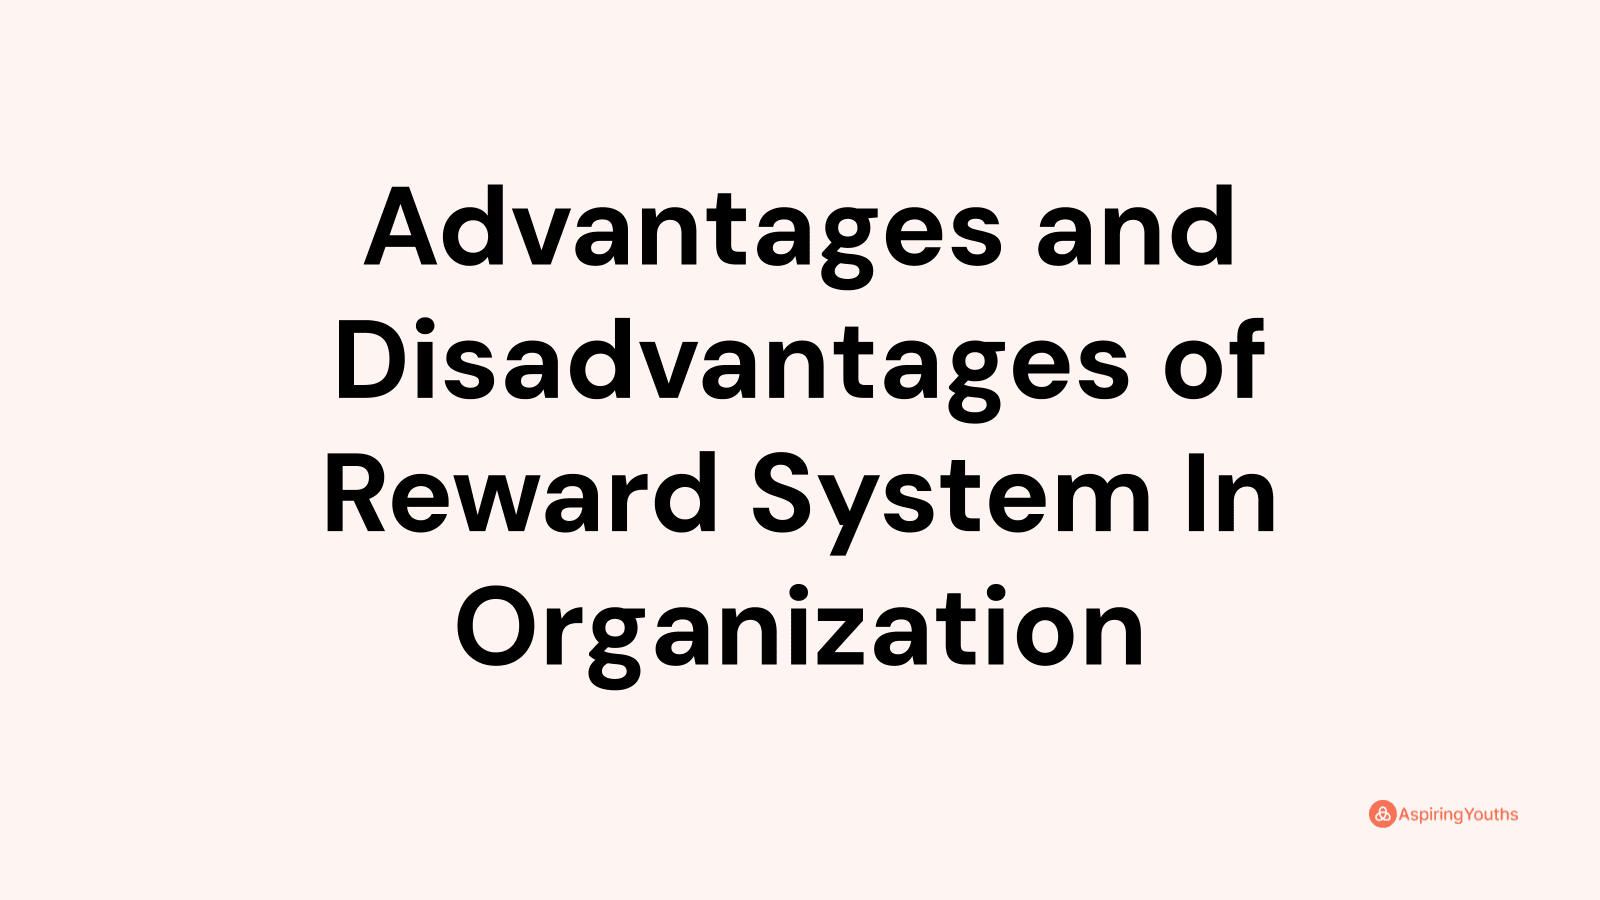 Advantages and disadvantages of Reward System In Organization